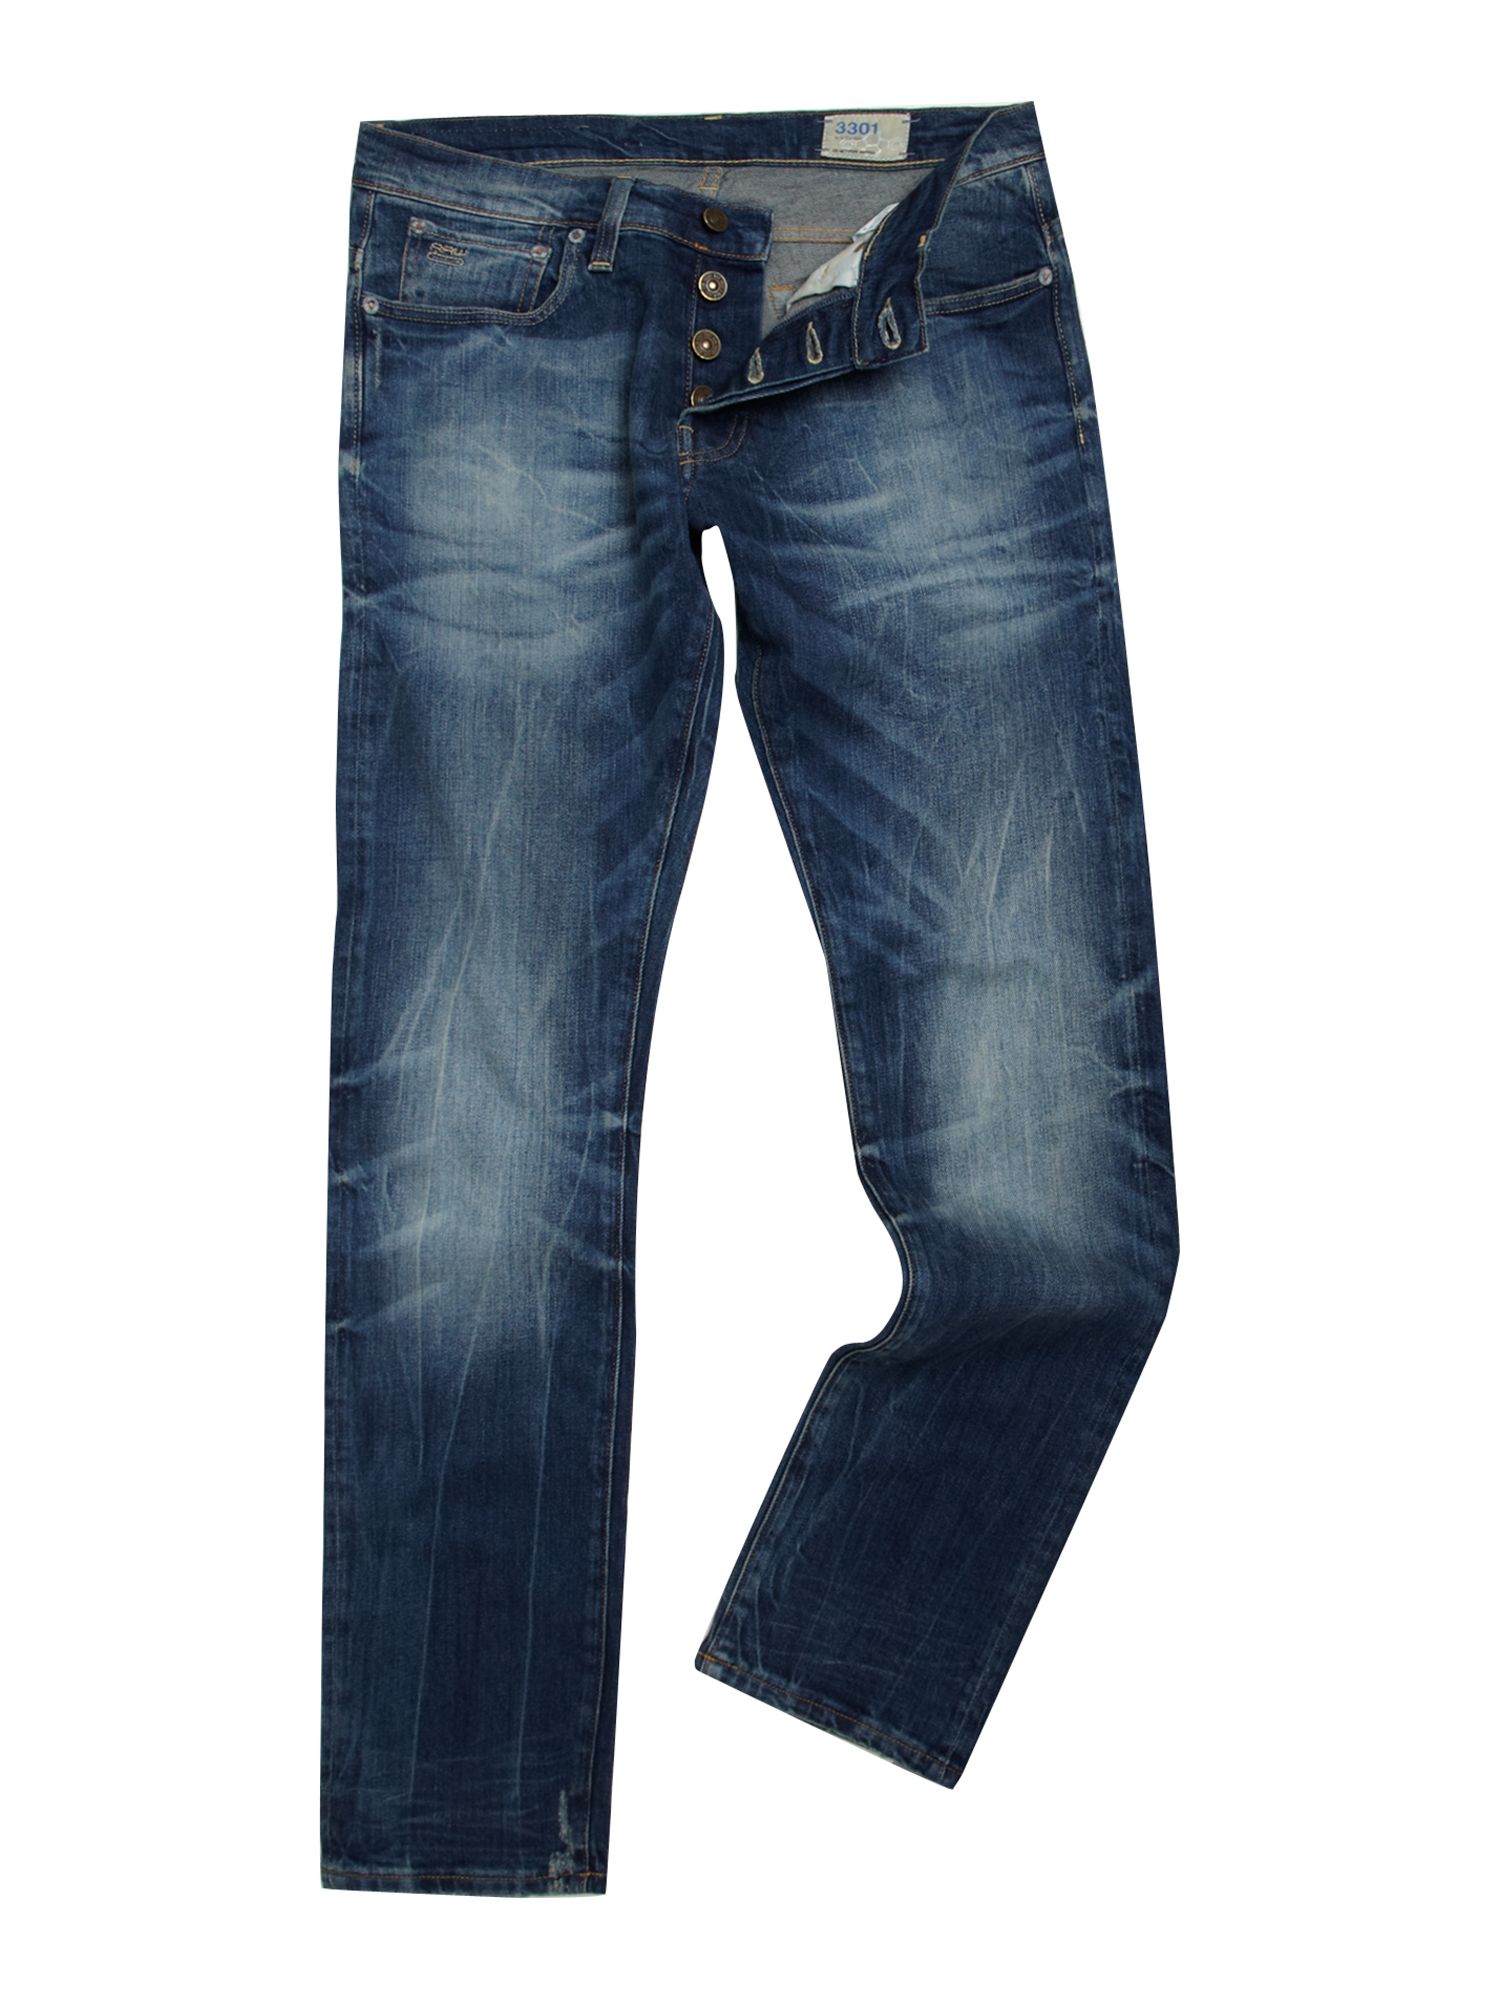 G-star Raw Slim Fit Washed Jeans in Blue for Men (denim) | Lyst